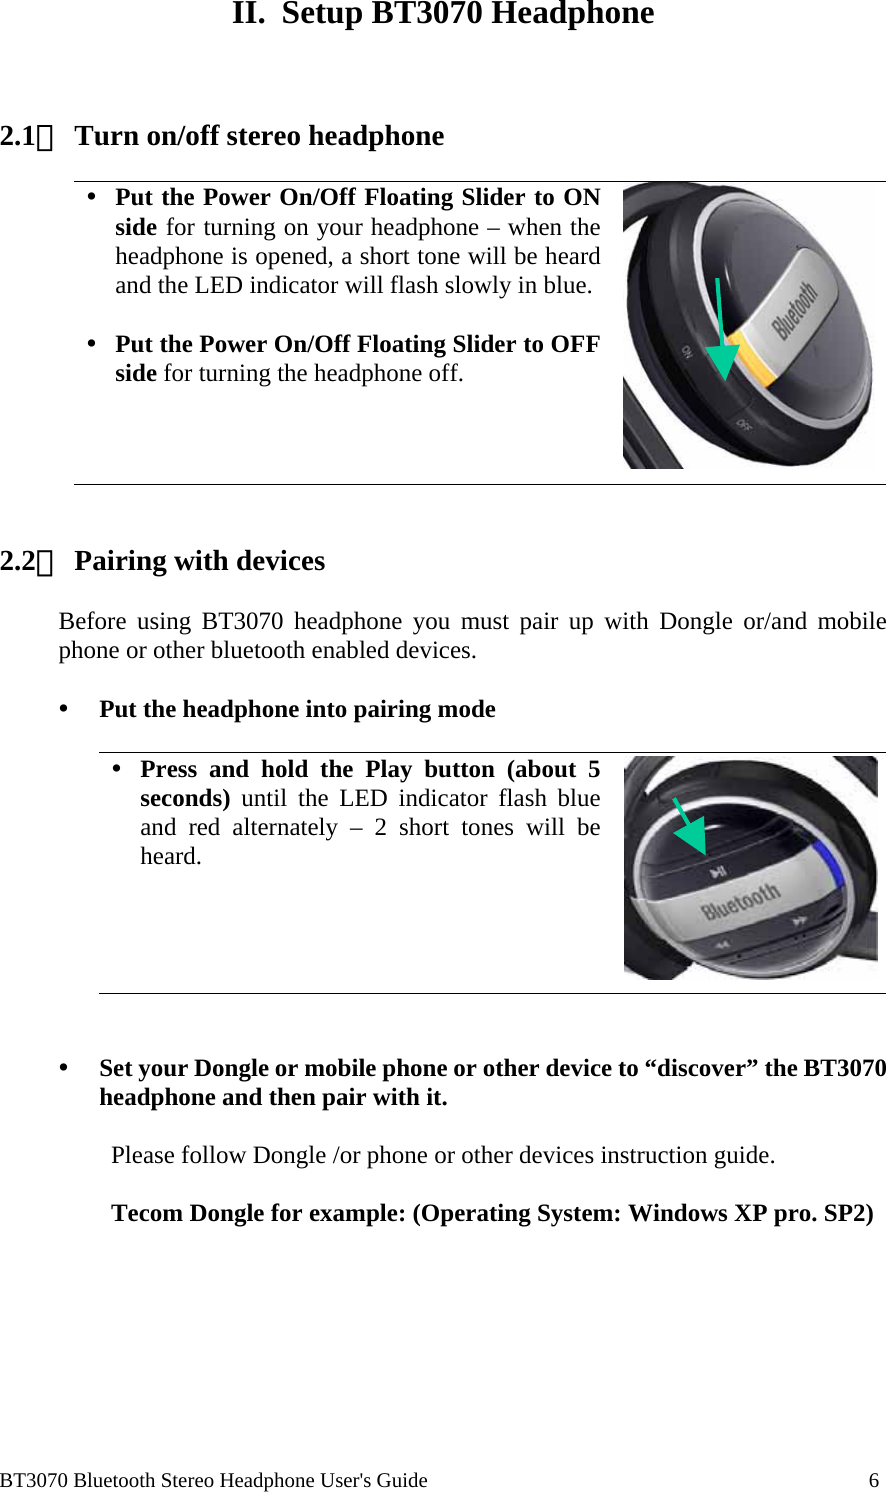  BT3070 Bluetooth Stereo Headphone User&apos;s Guide                                                                                    6  II.  Setup BT3070 Headphone    2.1、 Turn on/off stereo headphone    Put the Power On/Off Floating Slider to ON side for turning on your headphone – when the headphone is opened, a short tone will be heard and the LED indicator will flash slowly in blue.   Put the Power On/Off Floating Slider to OFF side for turning the headphone off.      2.2、 Pairing with devices  Before using BT3070 headphone you must pair up with Dongle or/and mobile phone or other bluetooth enabled devices.    Put the headphone into pairing mode   Press and hold the Play button (about 5 seconds) until the LED indicator flash blue and red alternately – 2 short tones will be heard.       Set your Dongle or mobile phone or other device to “discover” the BT3070 headphone and then pair with it.   Please follow Dongle /or phone or other devices instruction guide.   Tecom Dongle for example: (Operating System: Windows XP pro. SP2)  